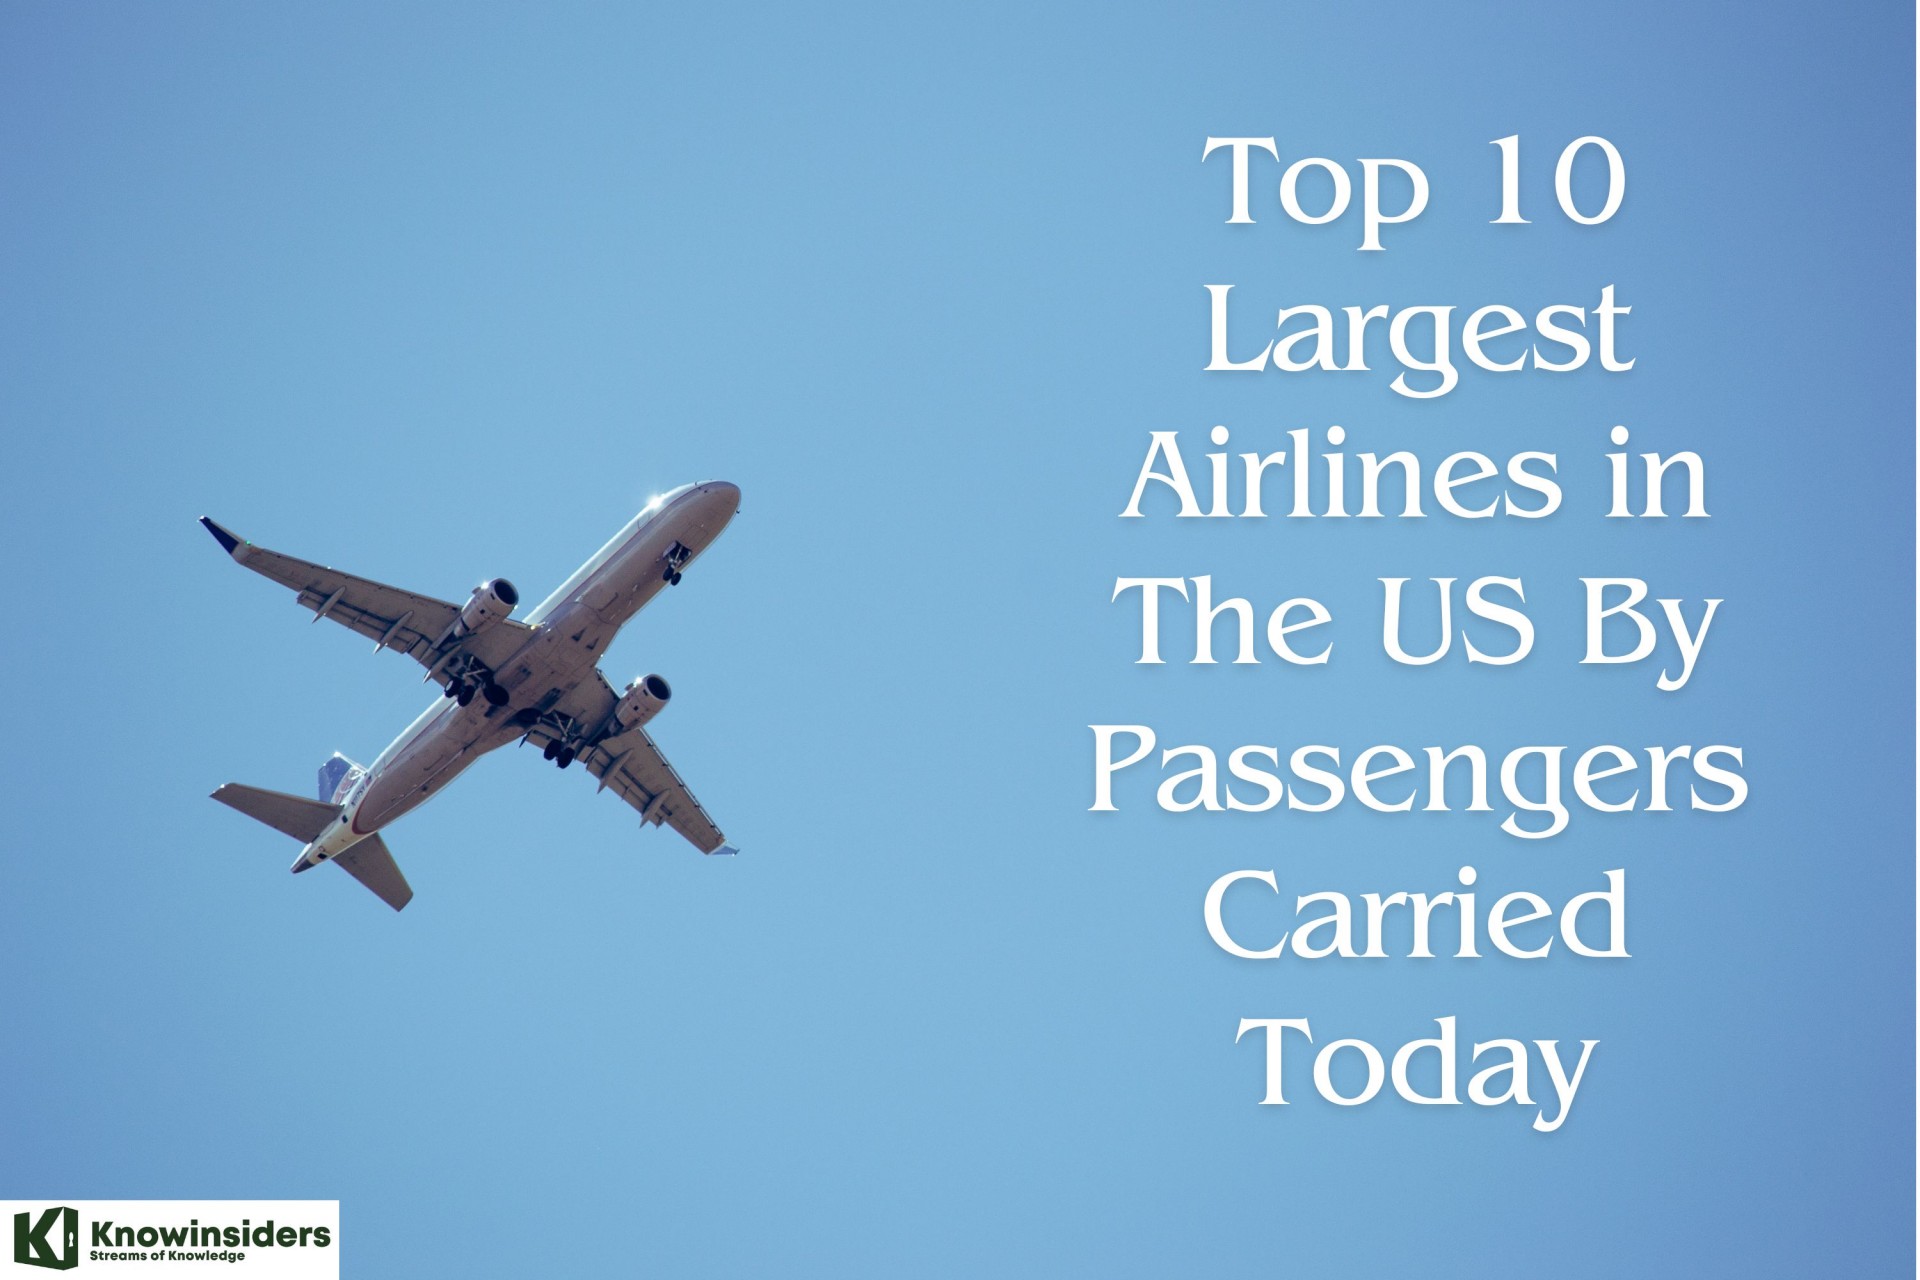 Top 10 Largest Airlines in the US by Passengers